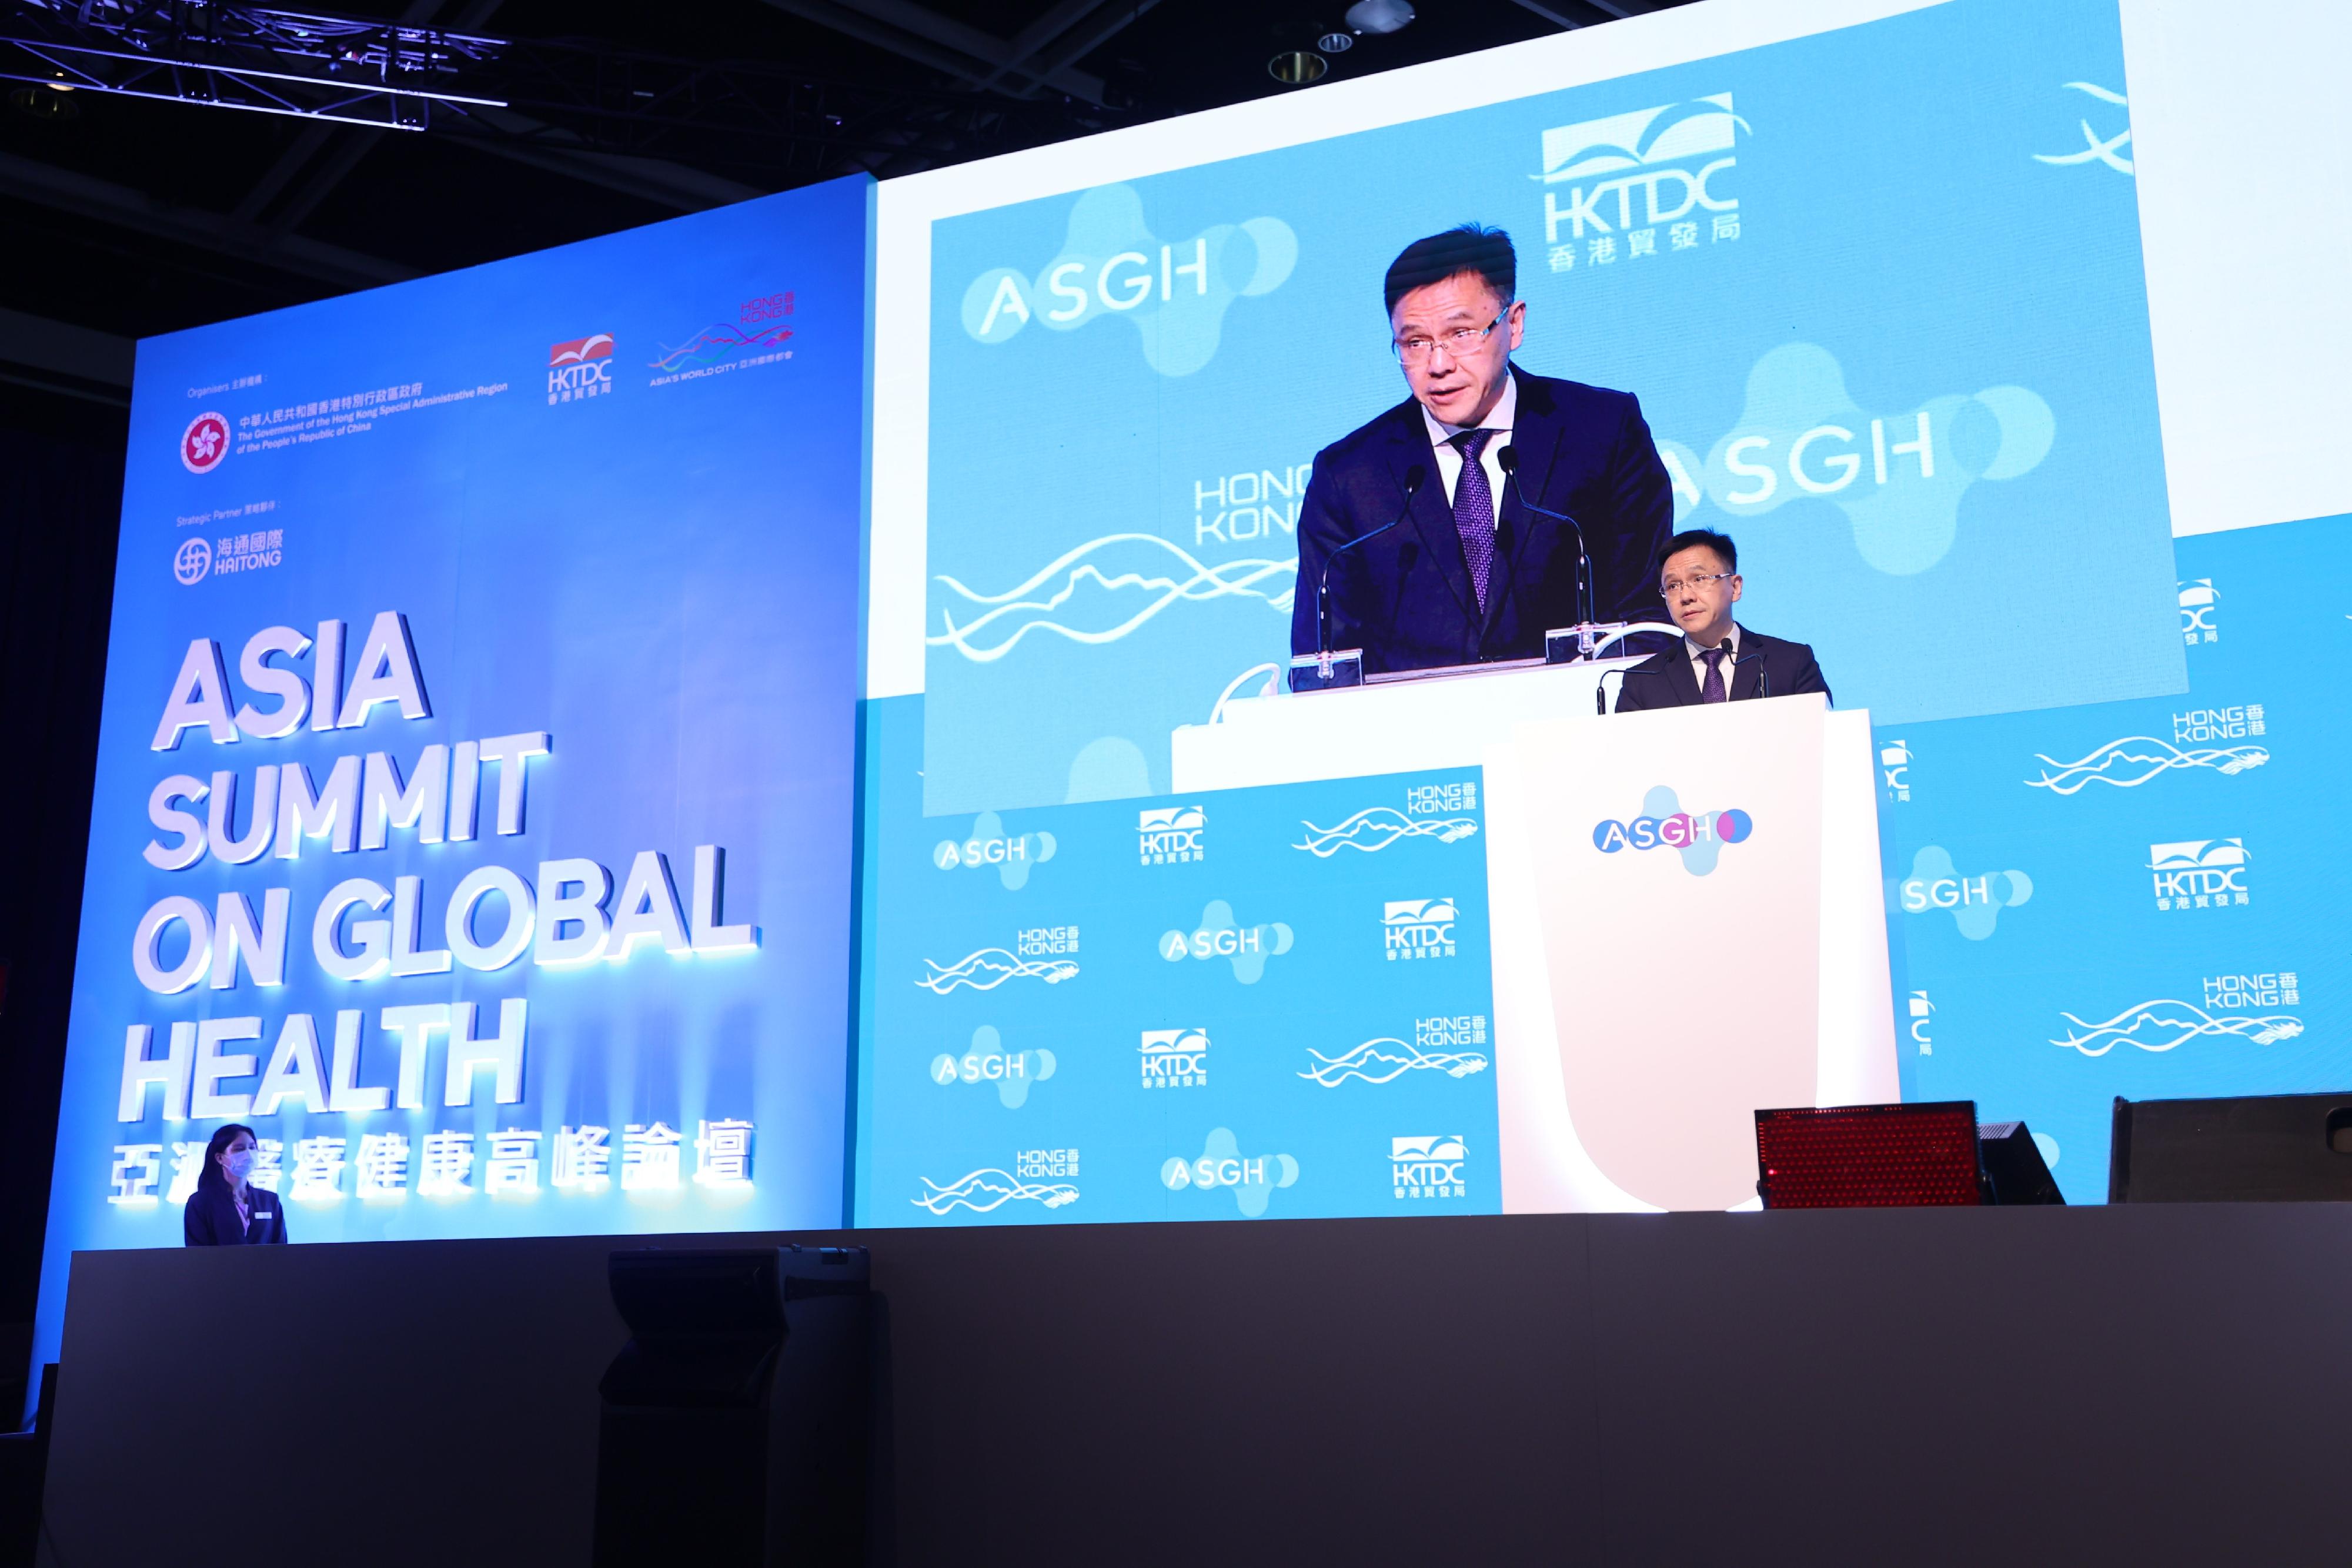 The Secretary for Innovation, Technology and Industry, Professor Sun Dong, speaks at the panel discussion session "Guangdong-Hong Kong-Macao Greater Bay Area as the Powerhouse of Healthcare Innovation" of the Asia Summit on Global Health today (May 17).